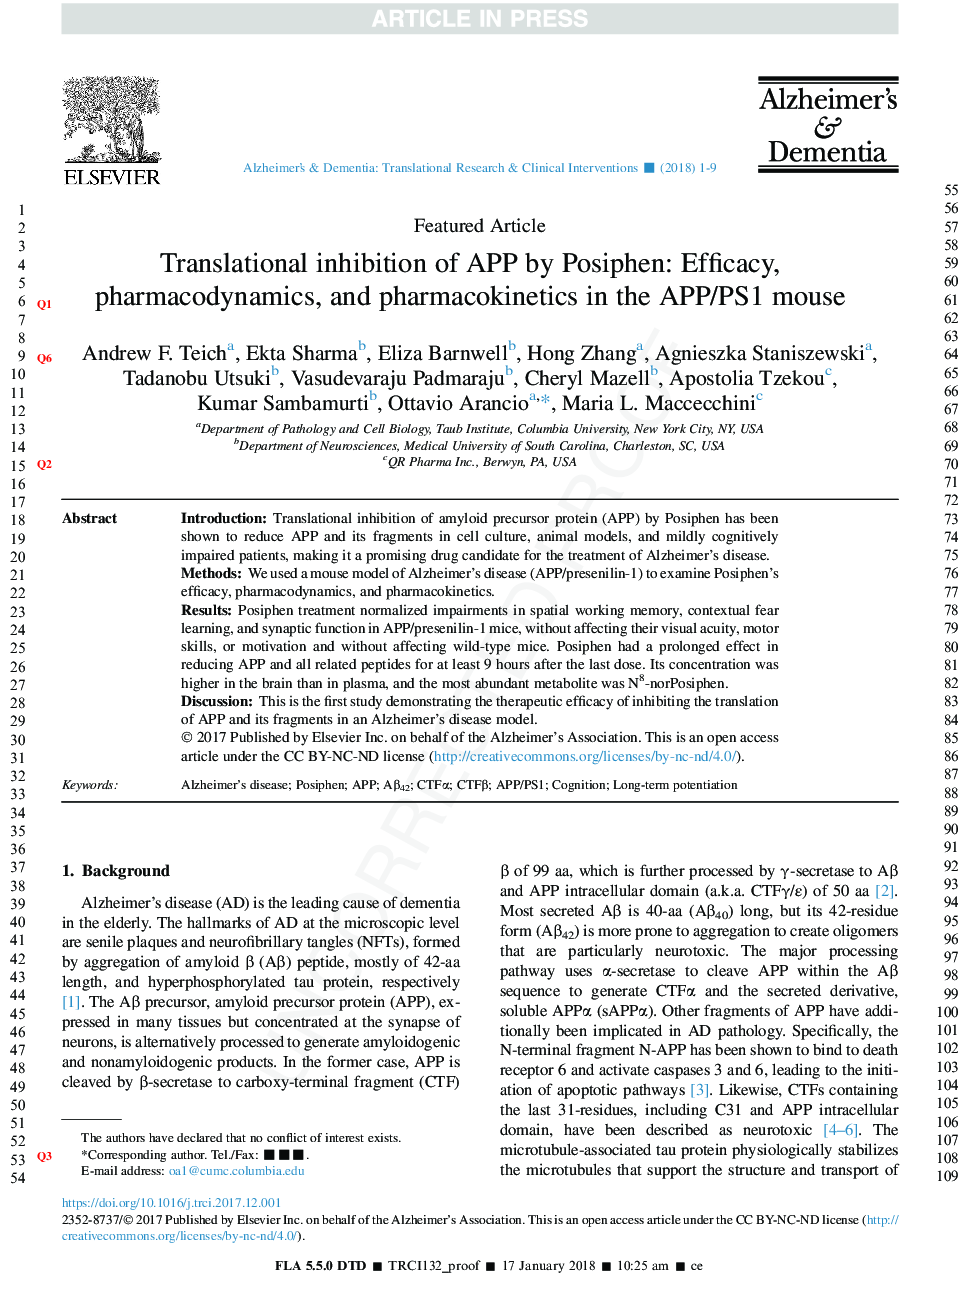 Translational inhibition of APP by Posiphen: Efficacy, pharmacodynamics, and pharmacokinetics in the APP/PS1 mouse